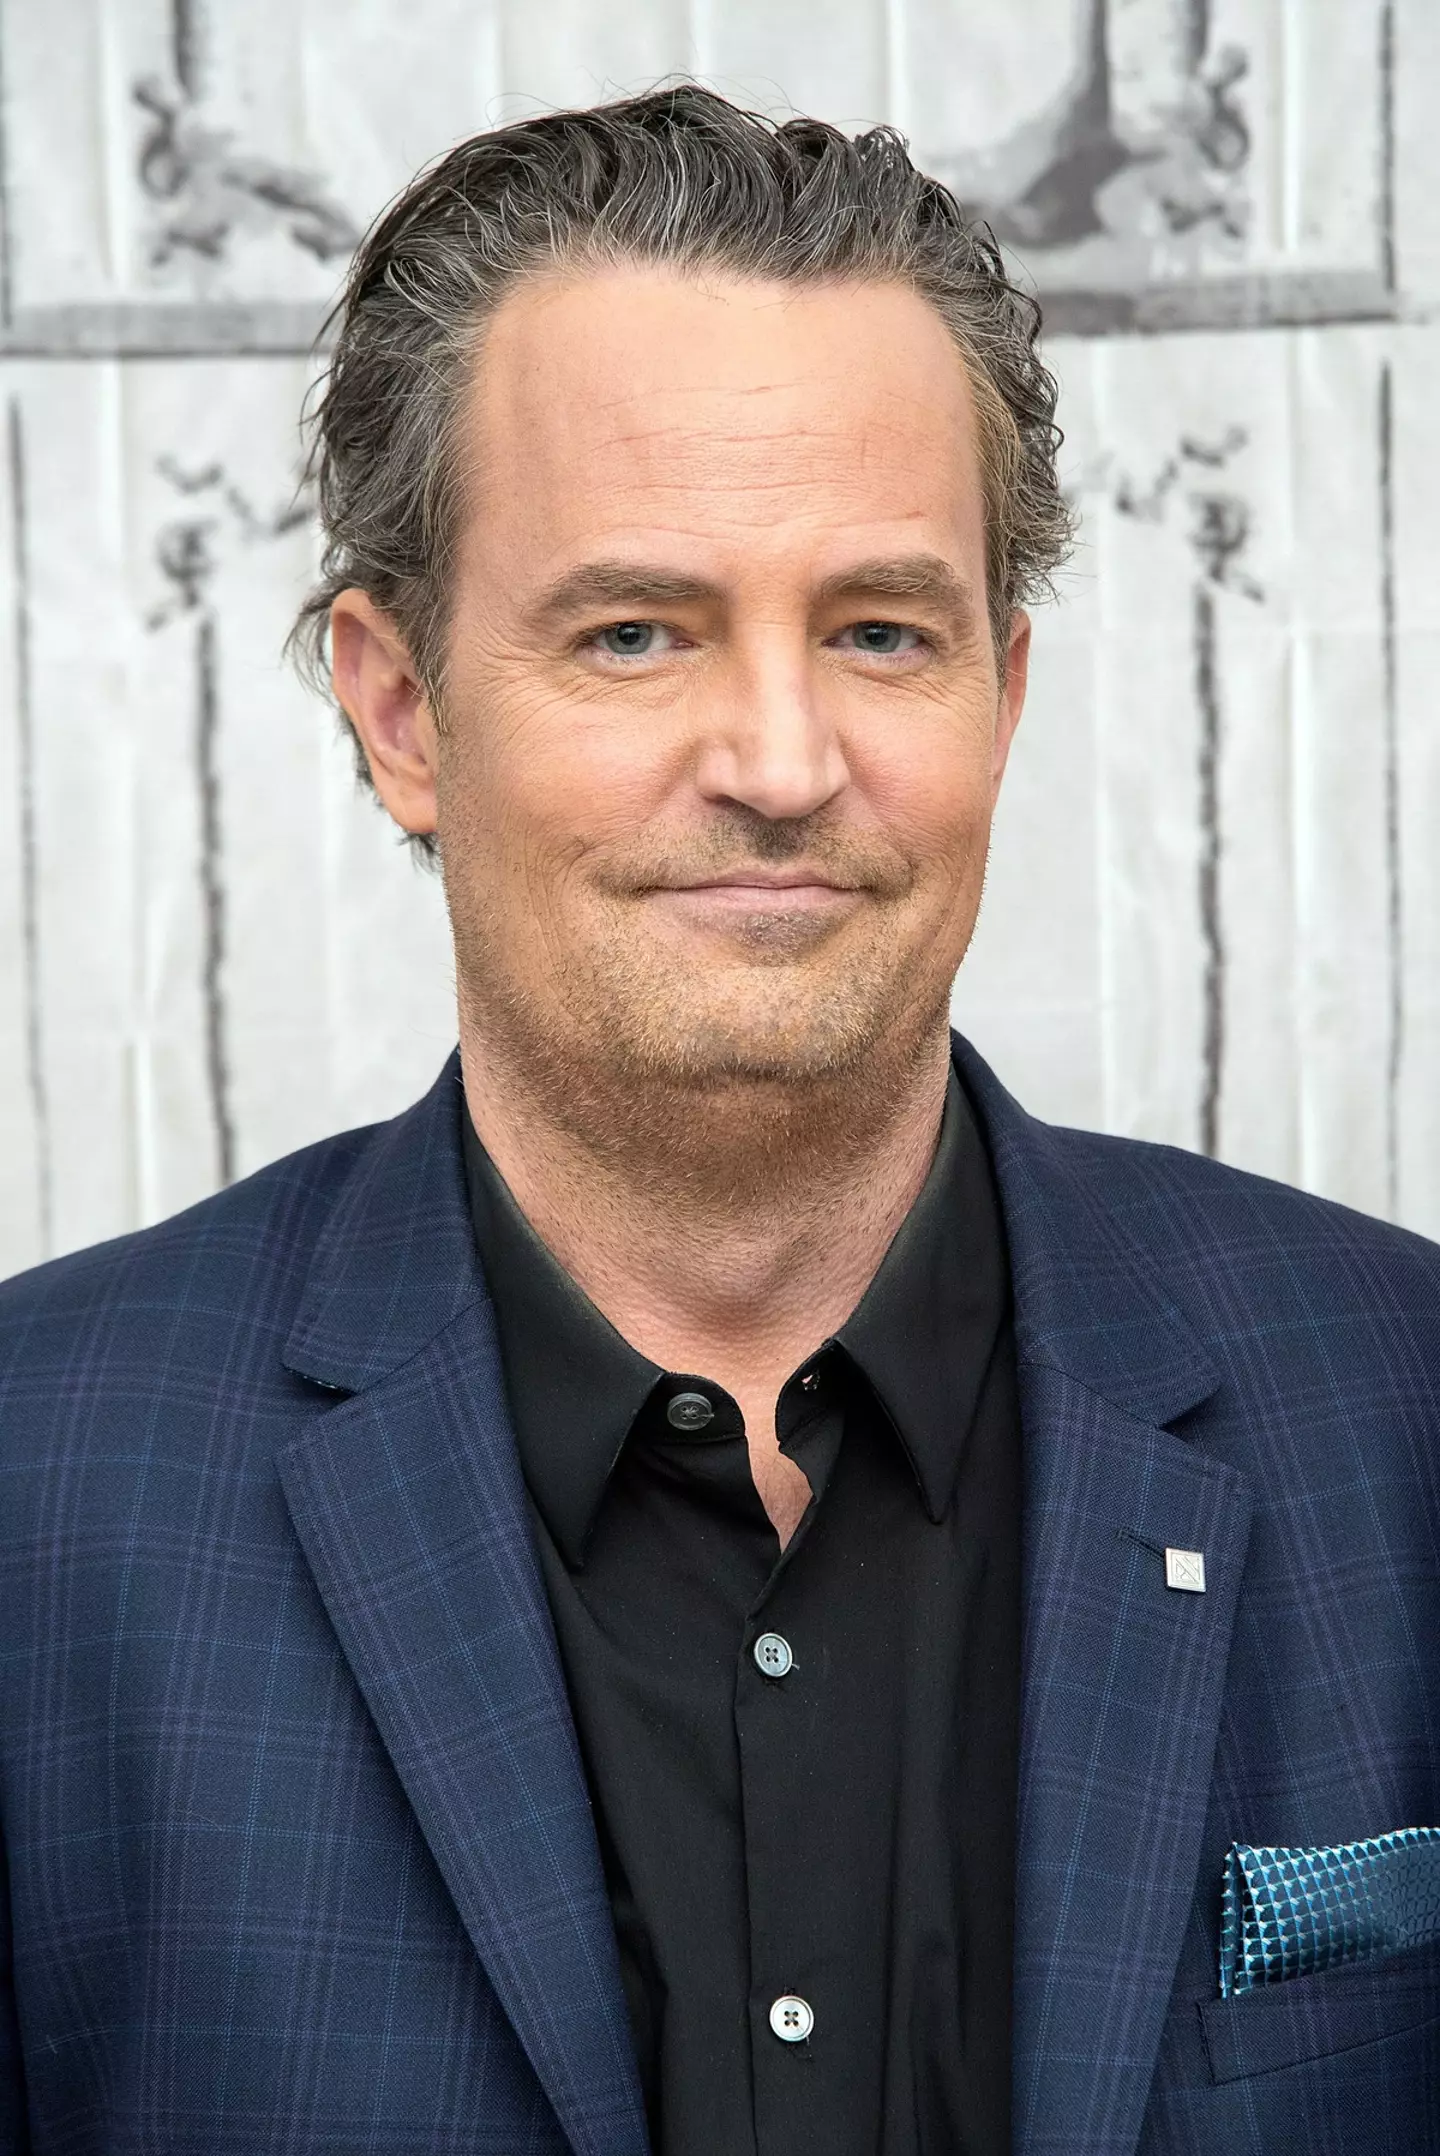 Matthew Perry died at the weekend, aged 54.